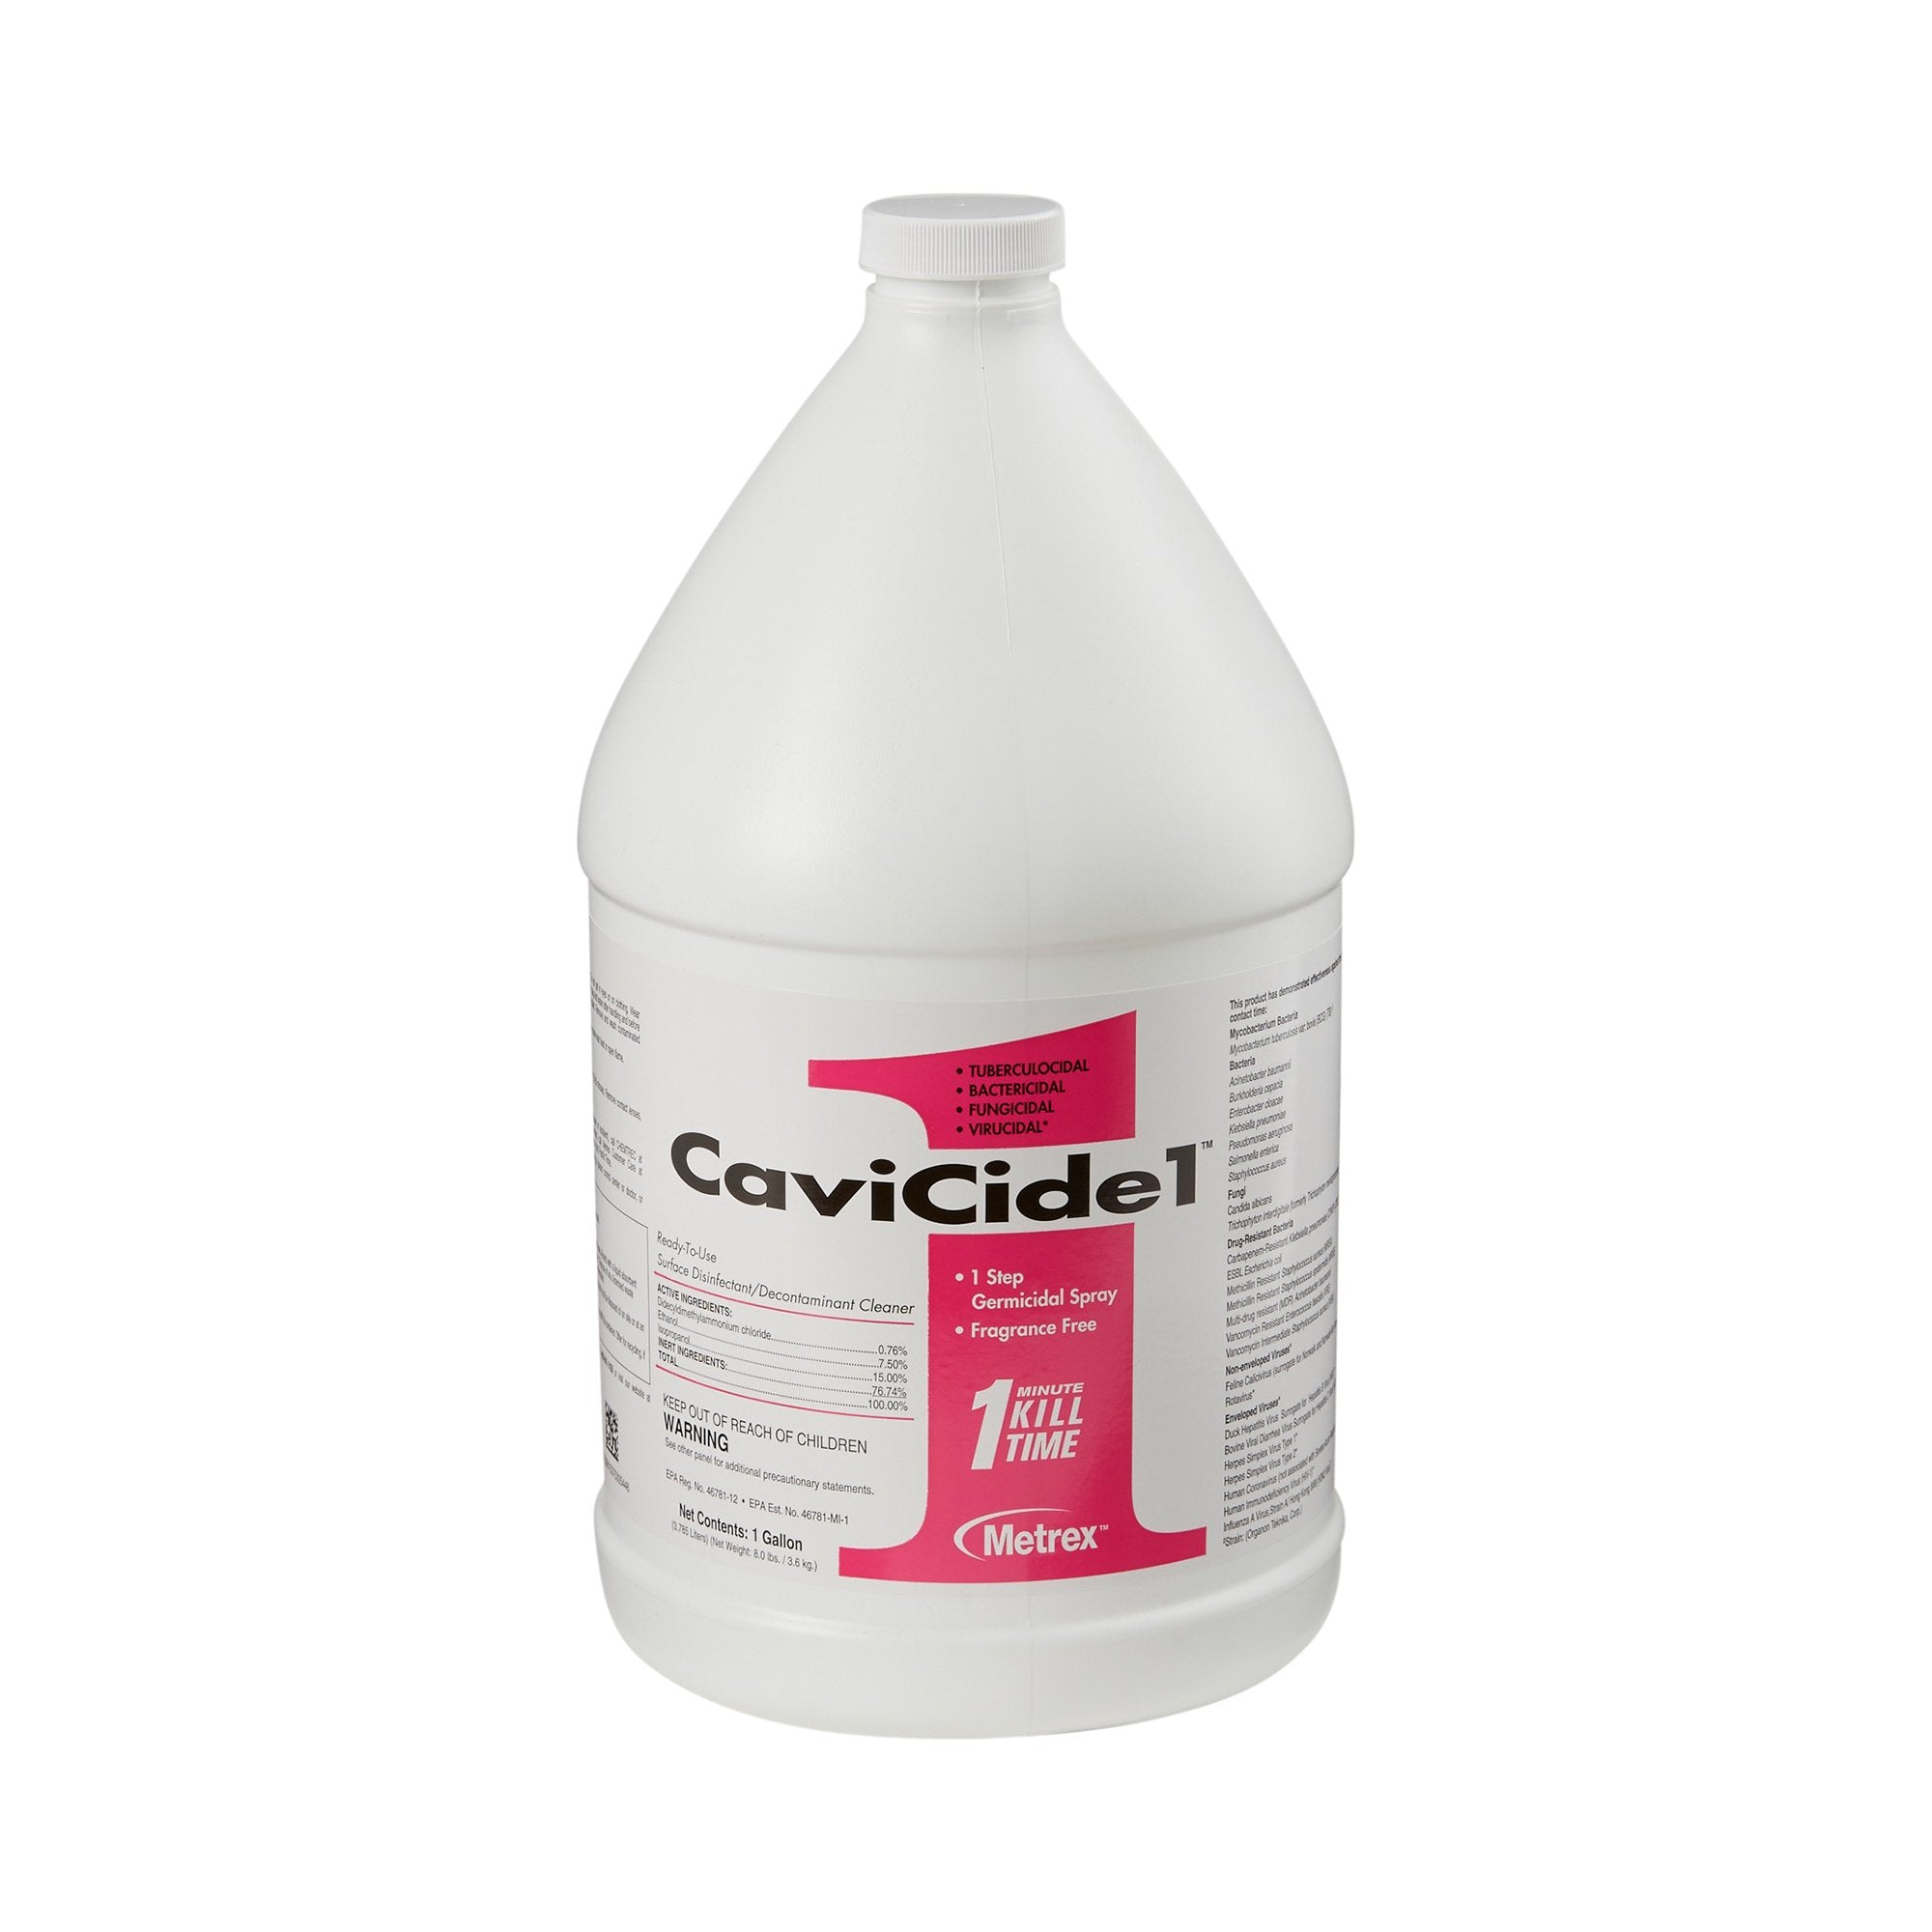 CaviCide1™ Surface Disinfectant Cleaner Alcohol Based Manual Pour Liquid 1 gal. Jug Alcohol Scent NonSterile